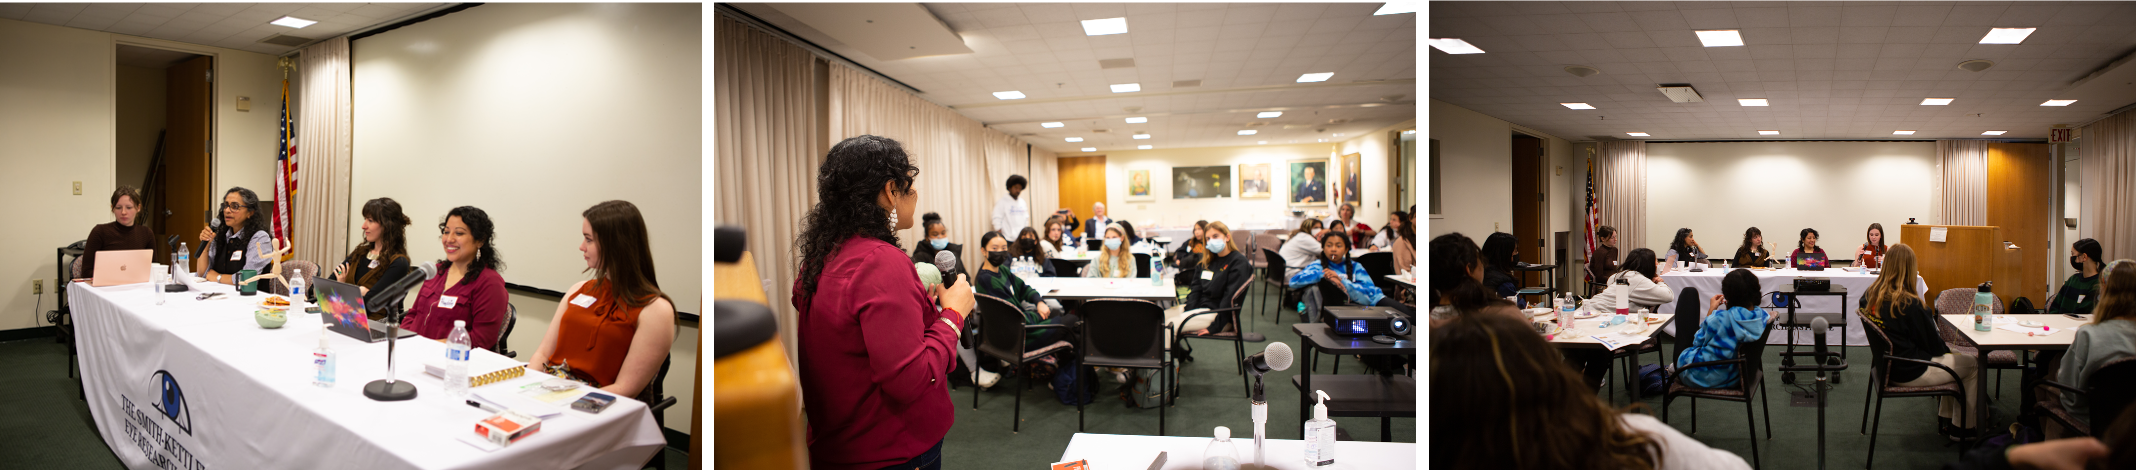 three images: 1. all panelists at the table with Preeti Verghese speaking into a microphone; 2. Haydee speaking to the students seated at tables; 3. view of the students with the panelists in the background